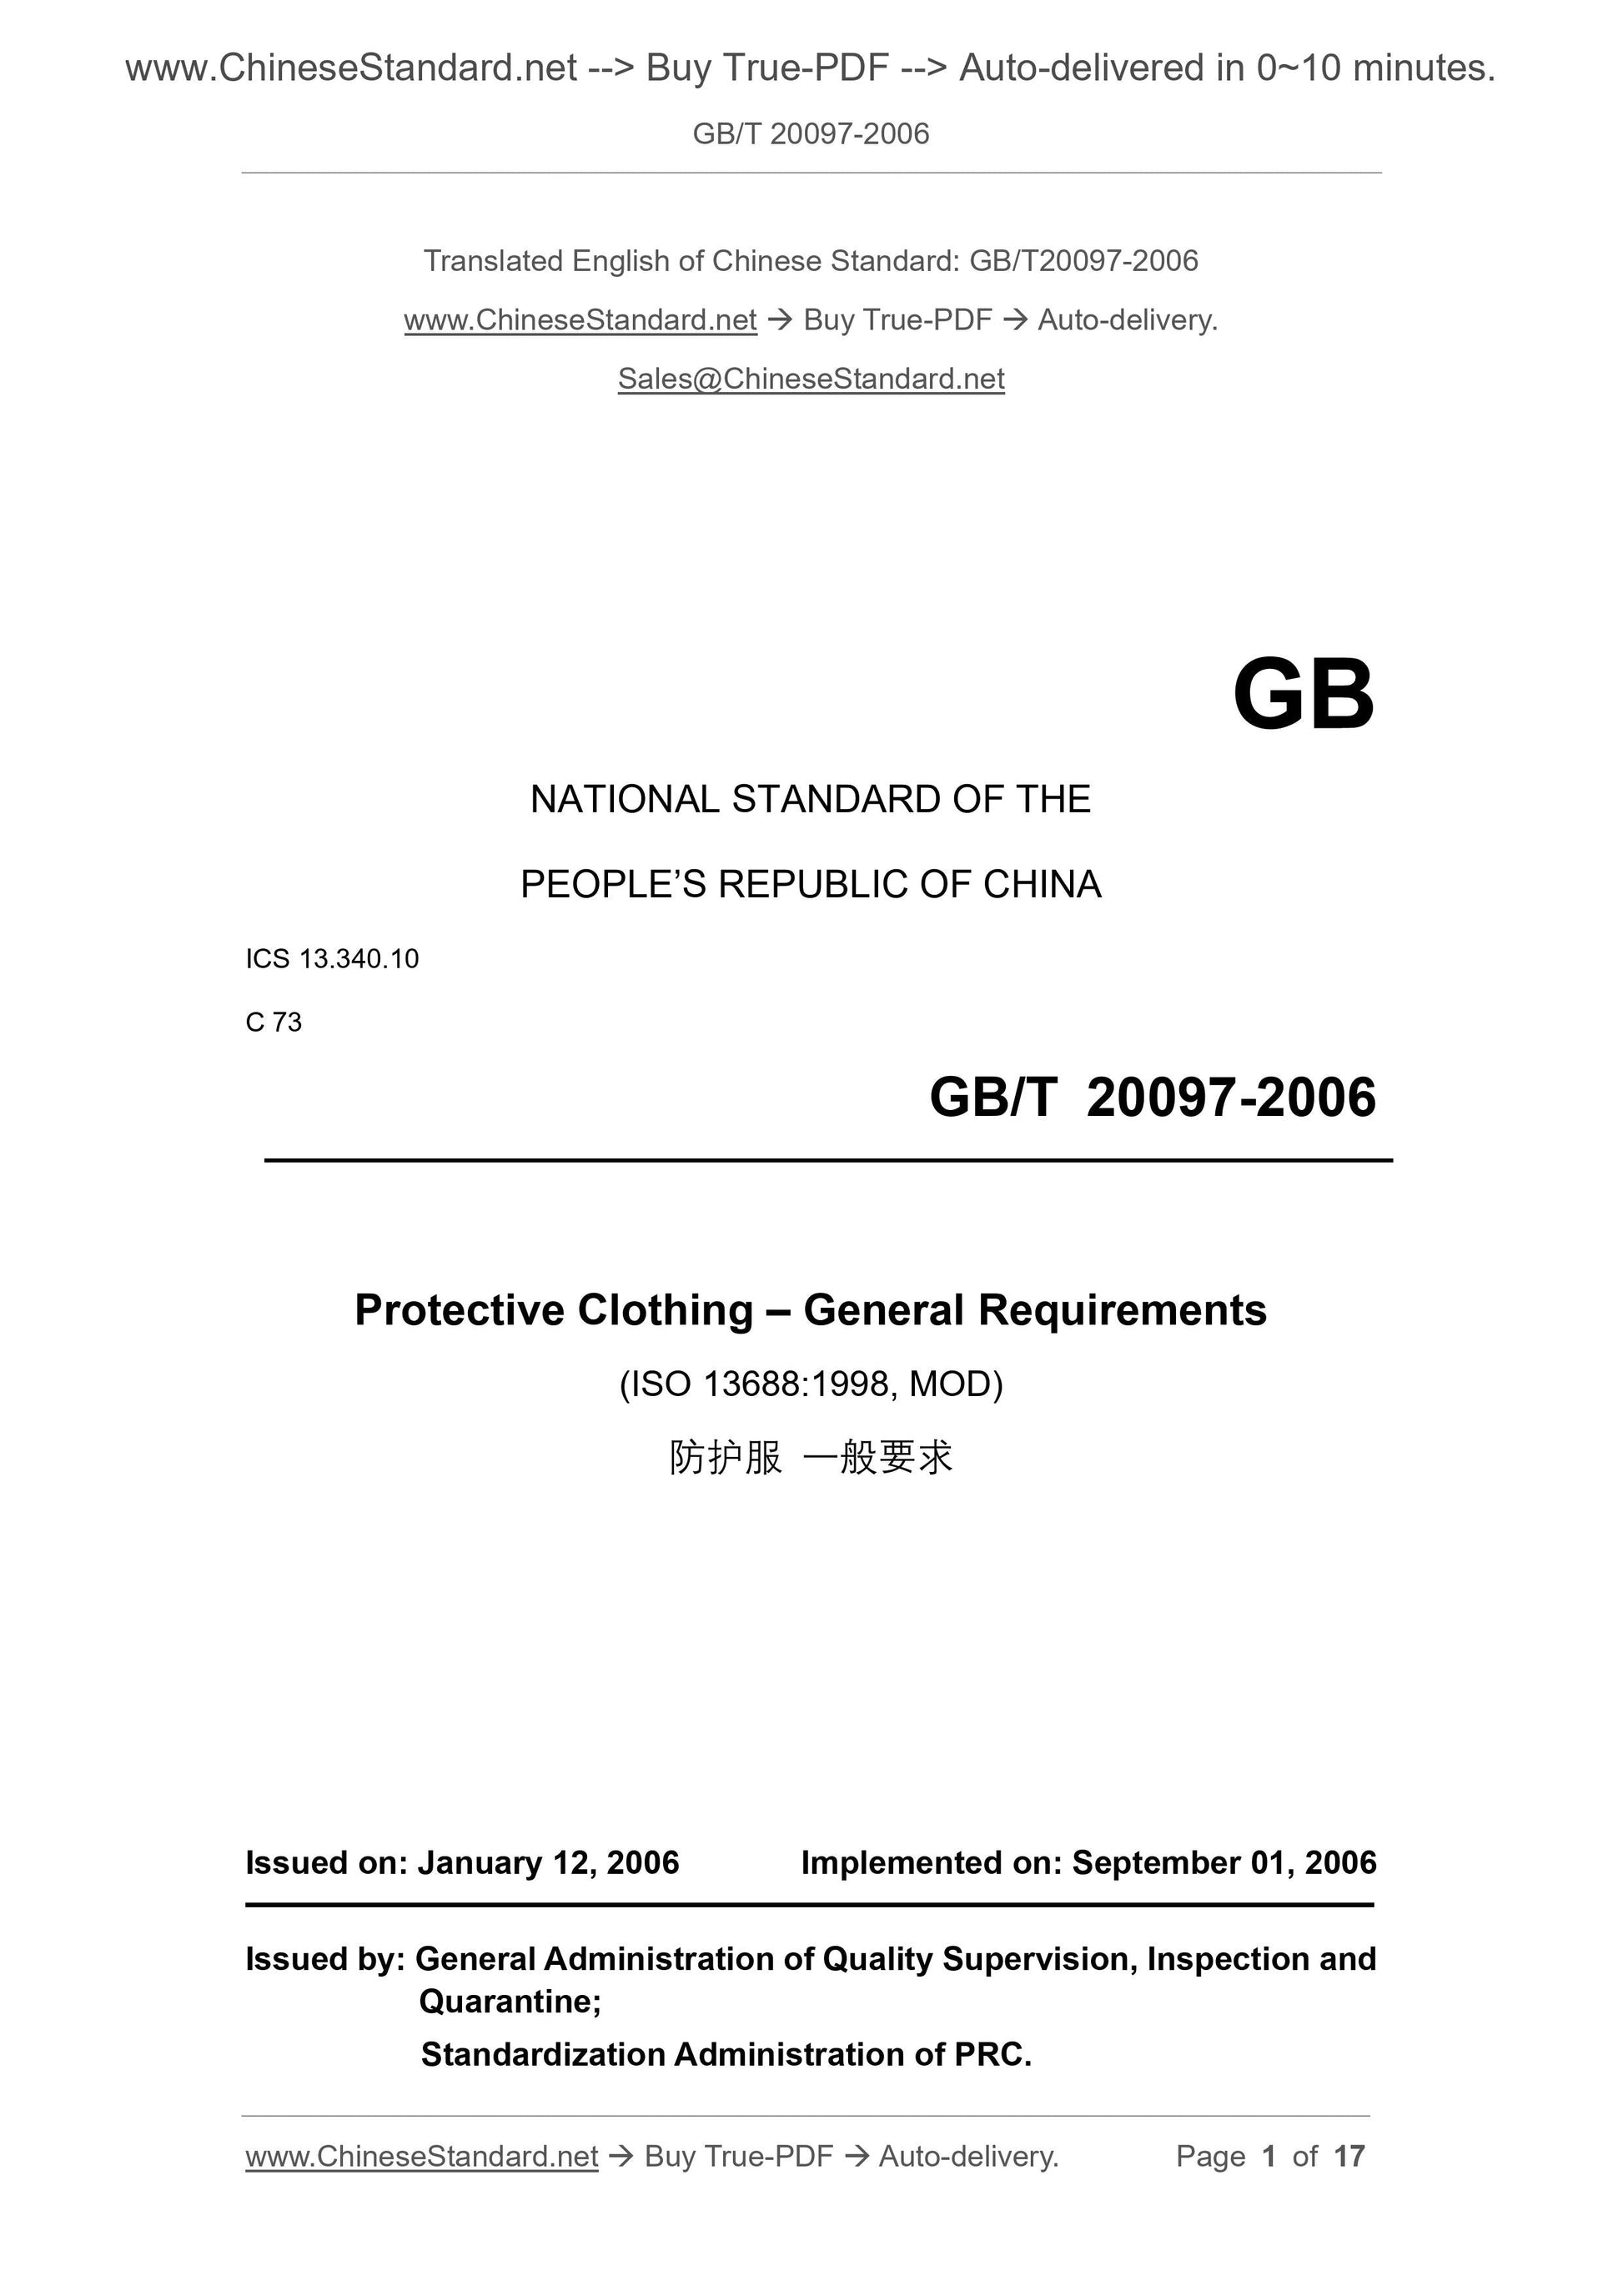 GB/T 20097-2006 Page 1